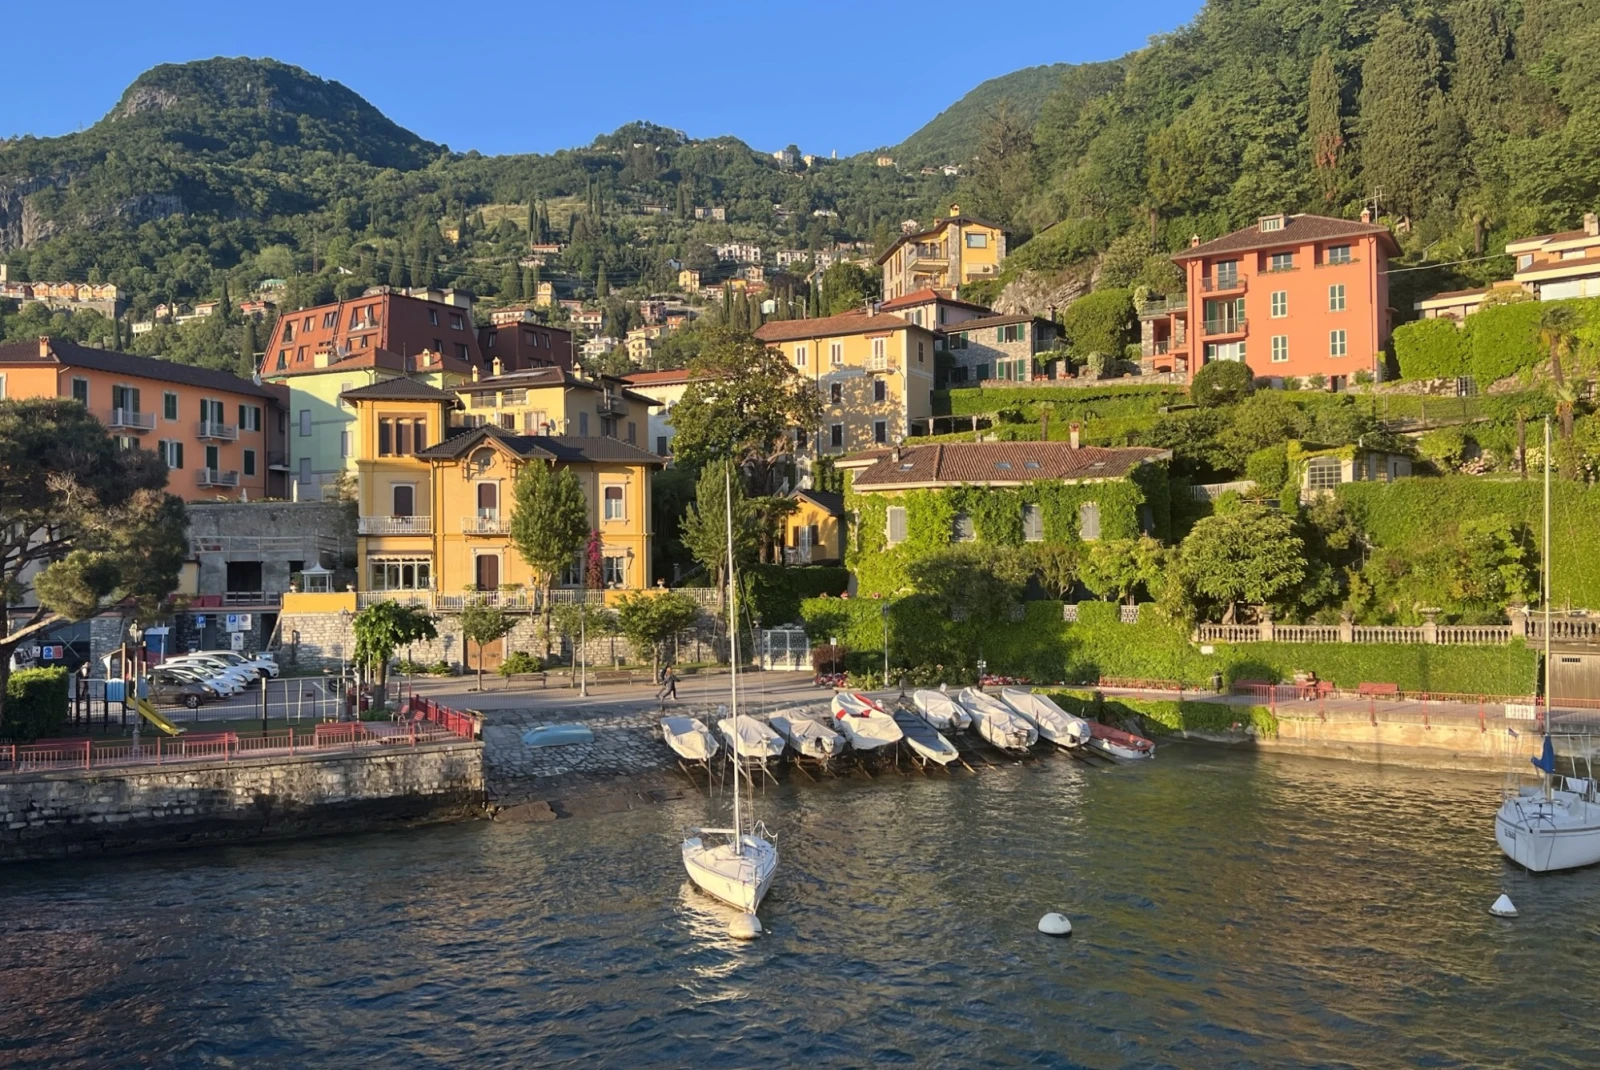 View of Villas in Lake Como and landscaped gardens by the lake and boats right before sunset.